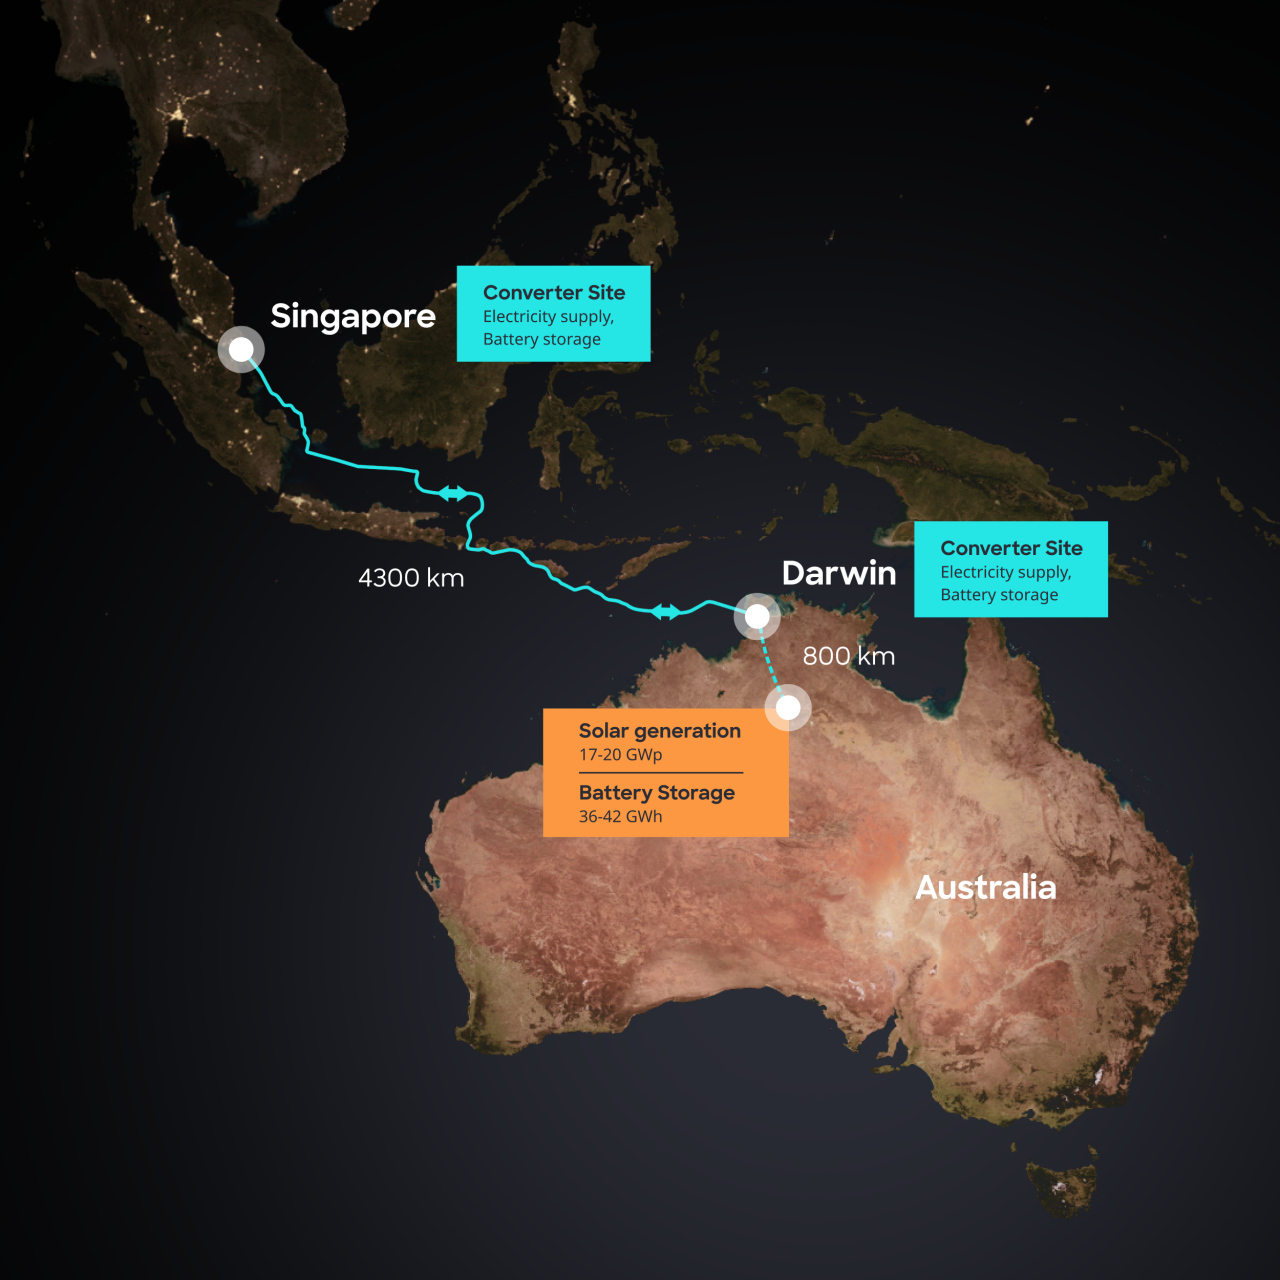 SunCable receives environmental clearance for Australia-Singapore RE power cable